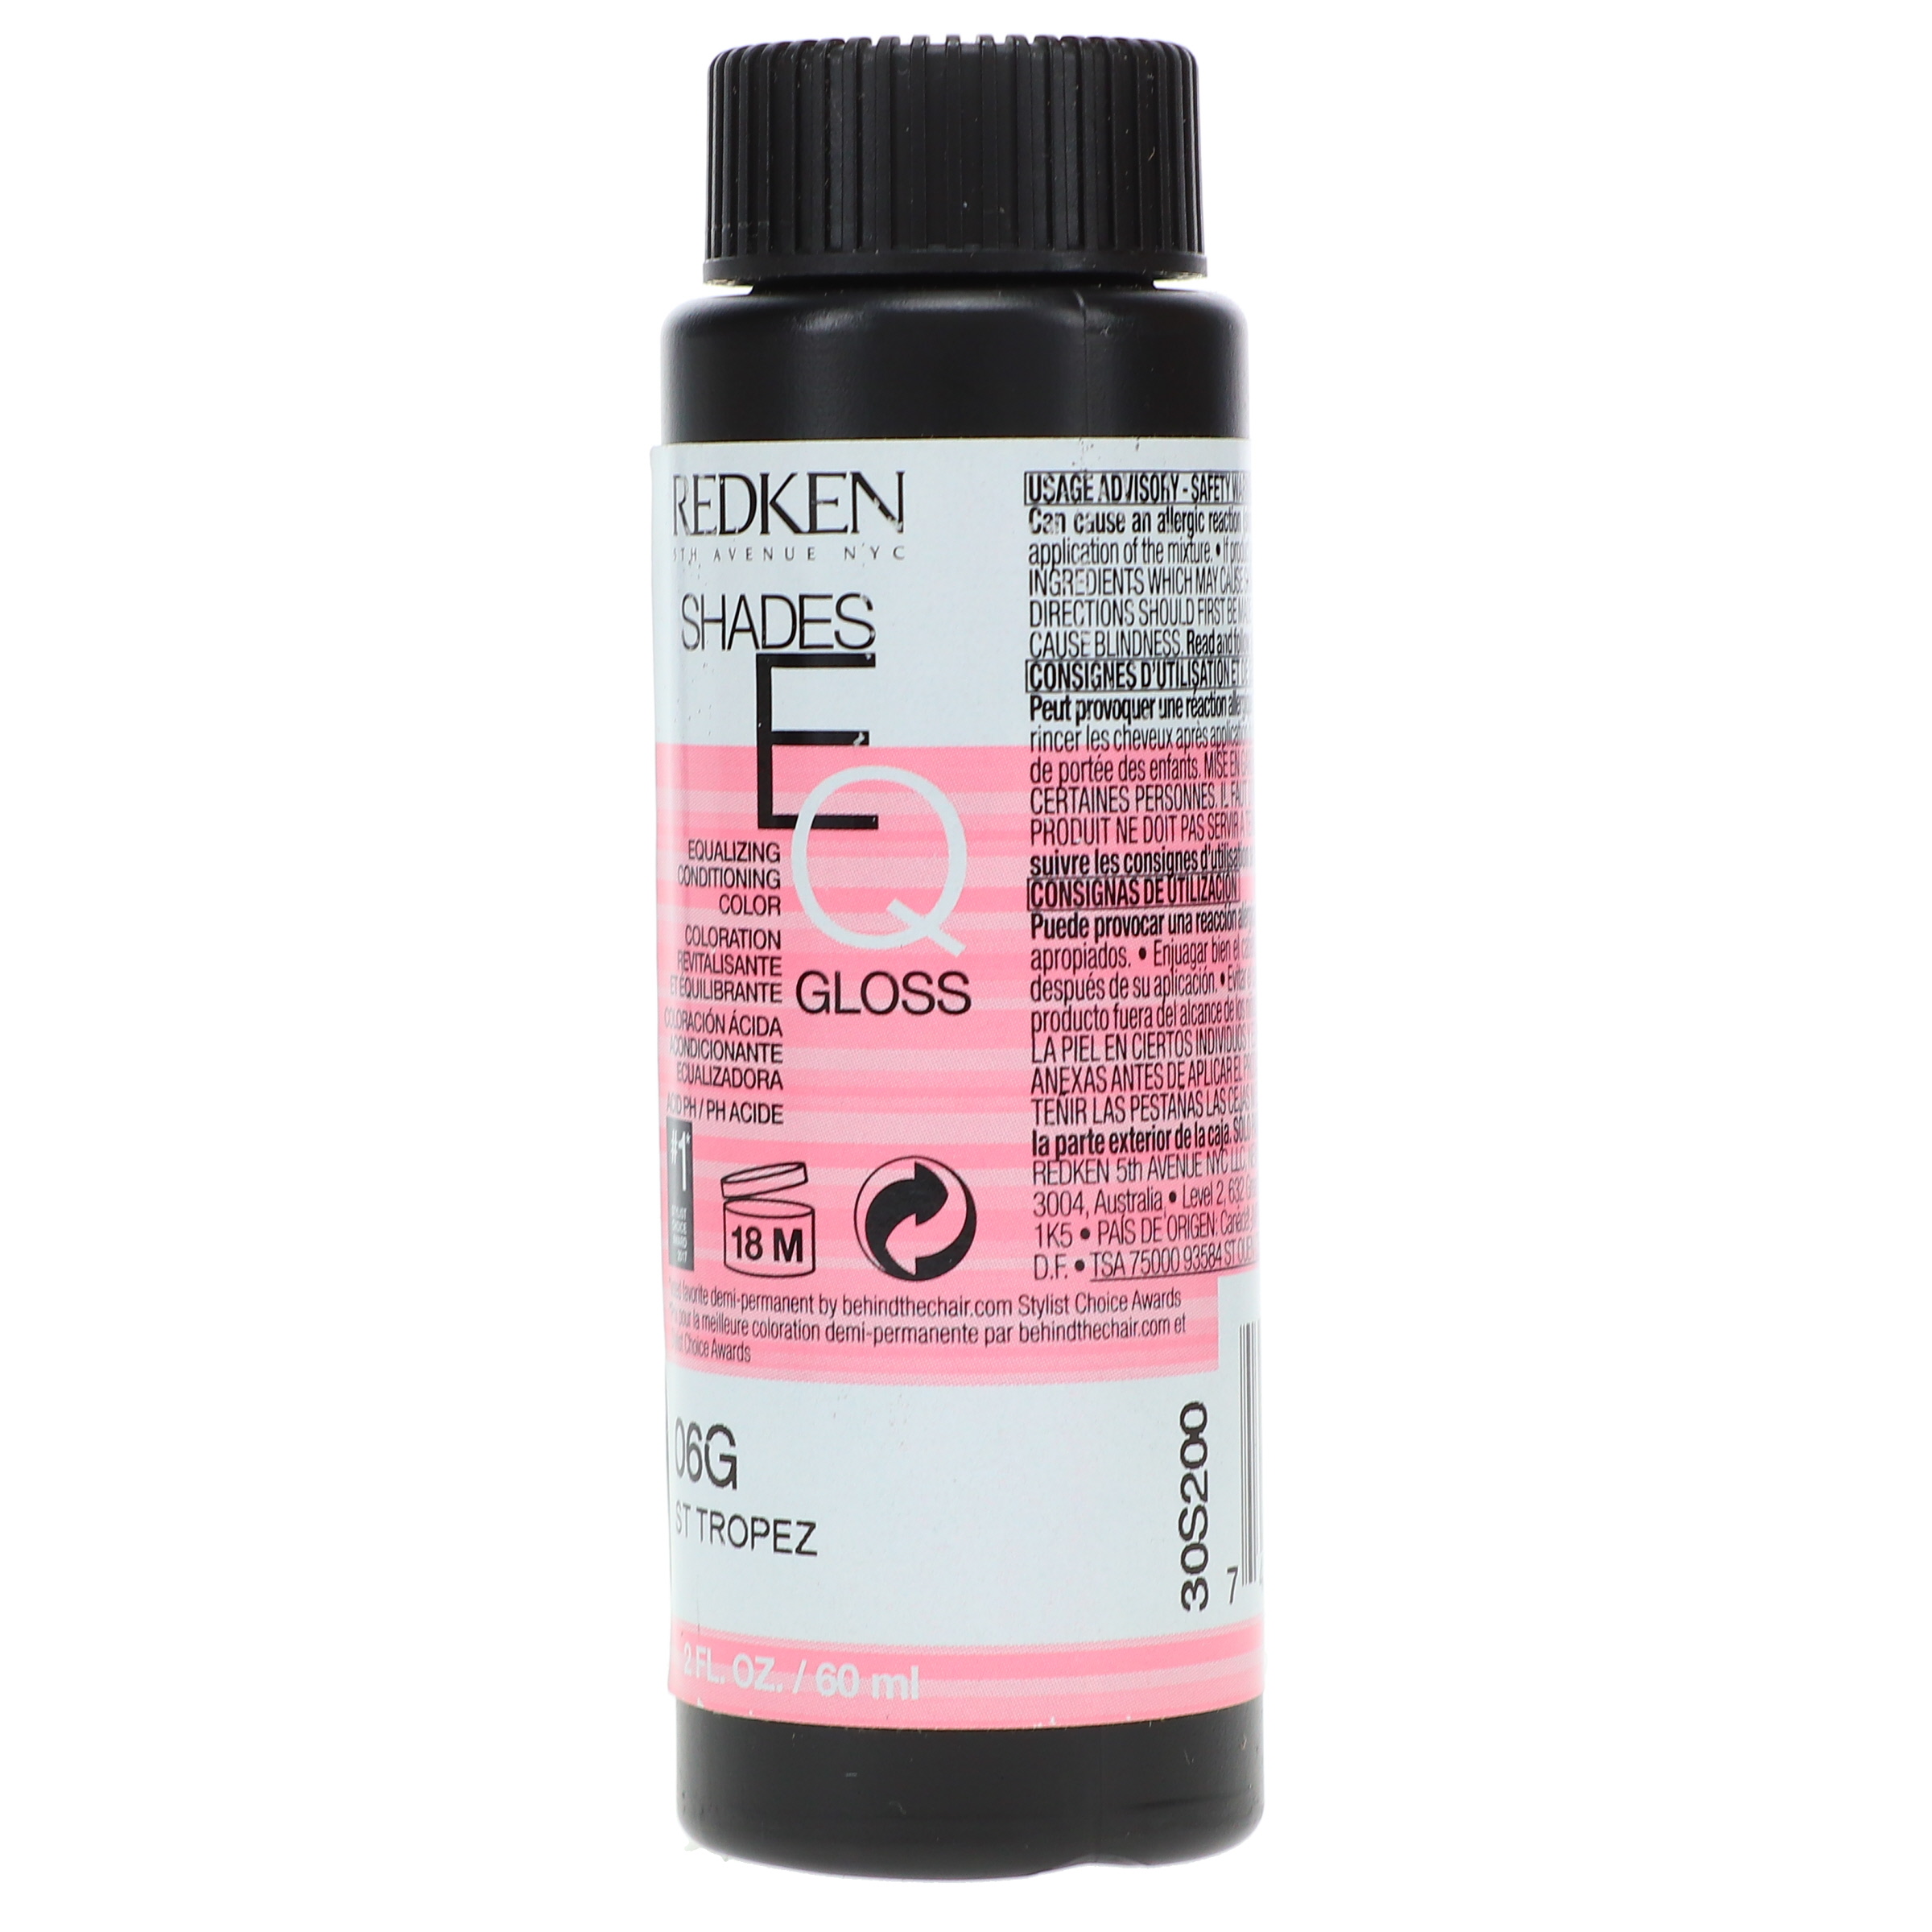 Redken Shades Eq Hair Color Gloss 06G - St.Tropez For Women, 2 Oz - image 2 of 2